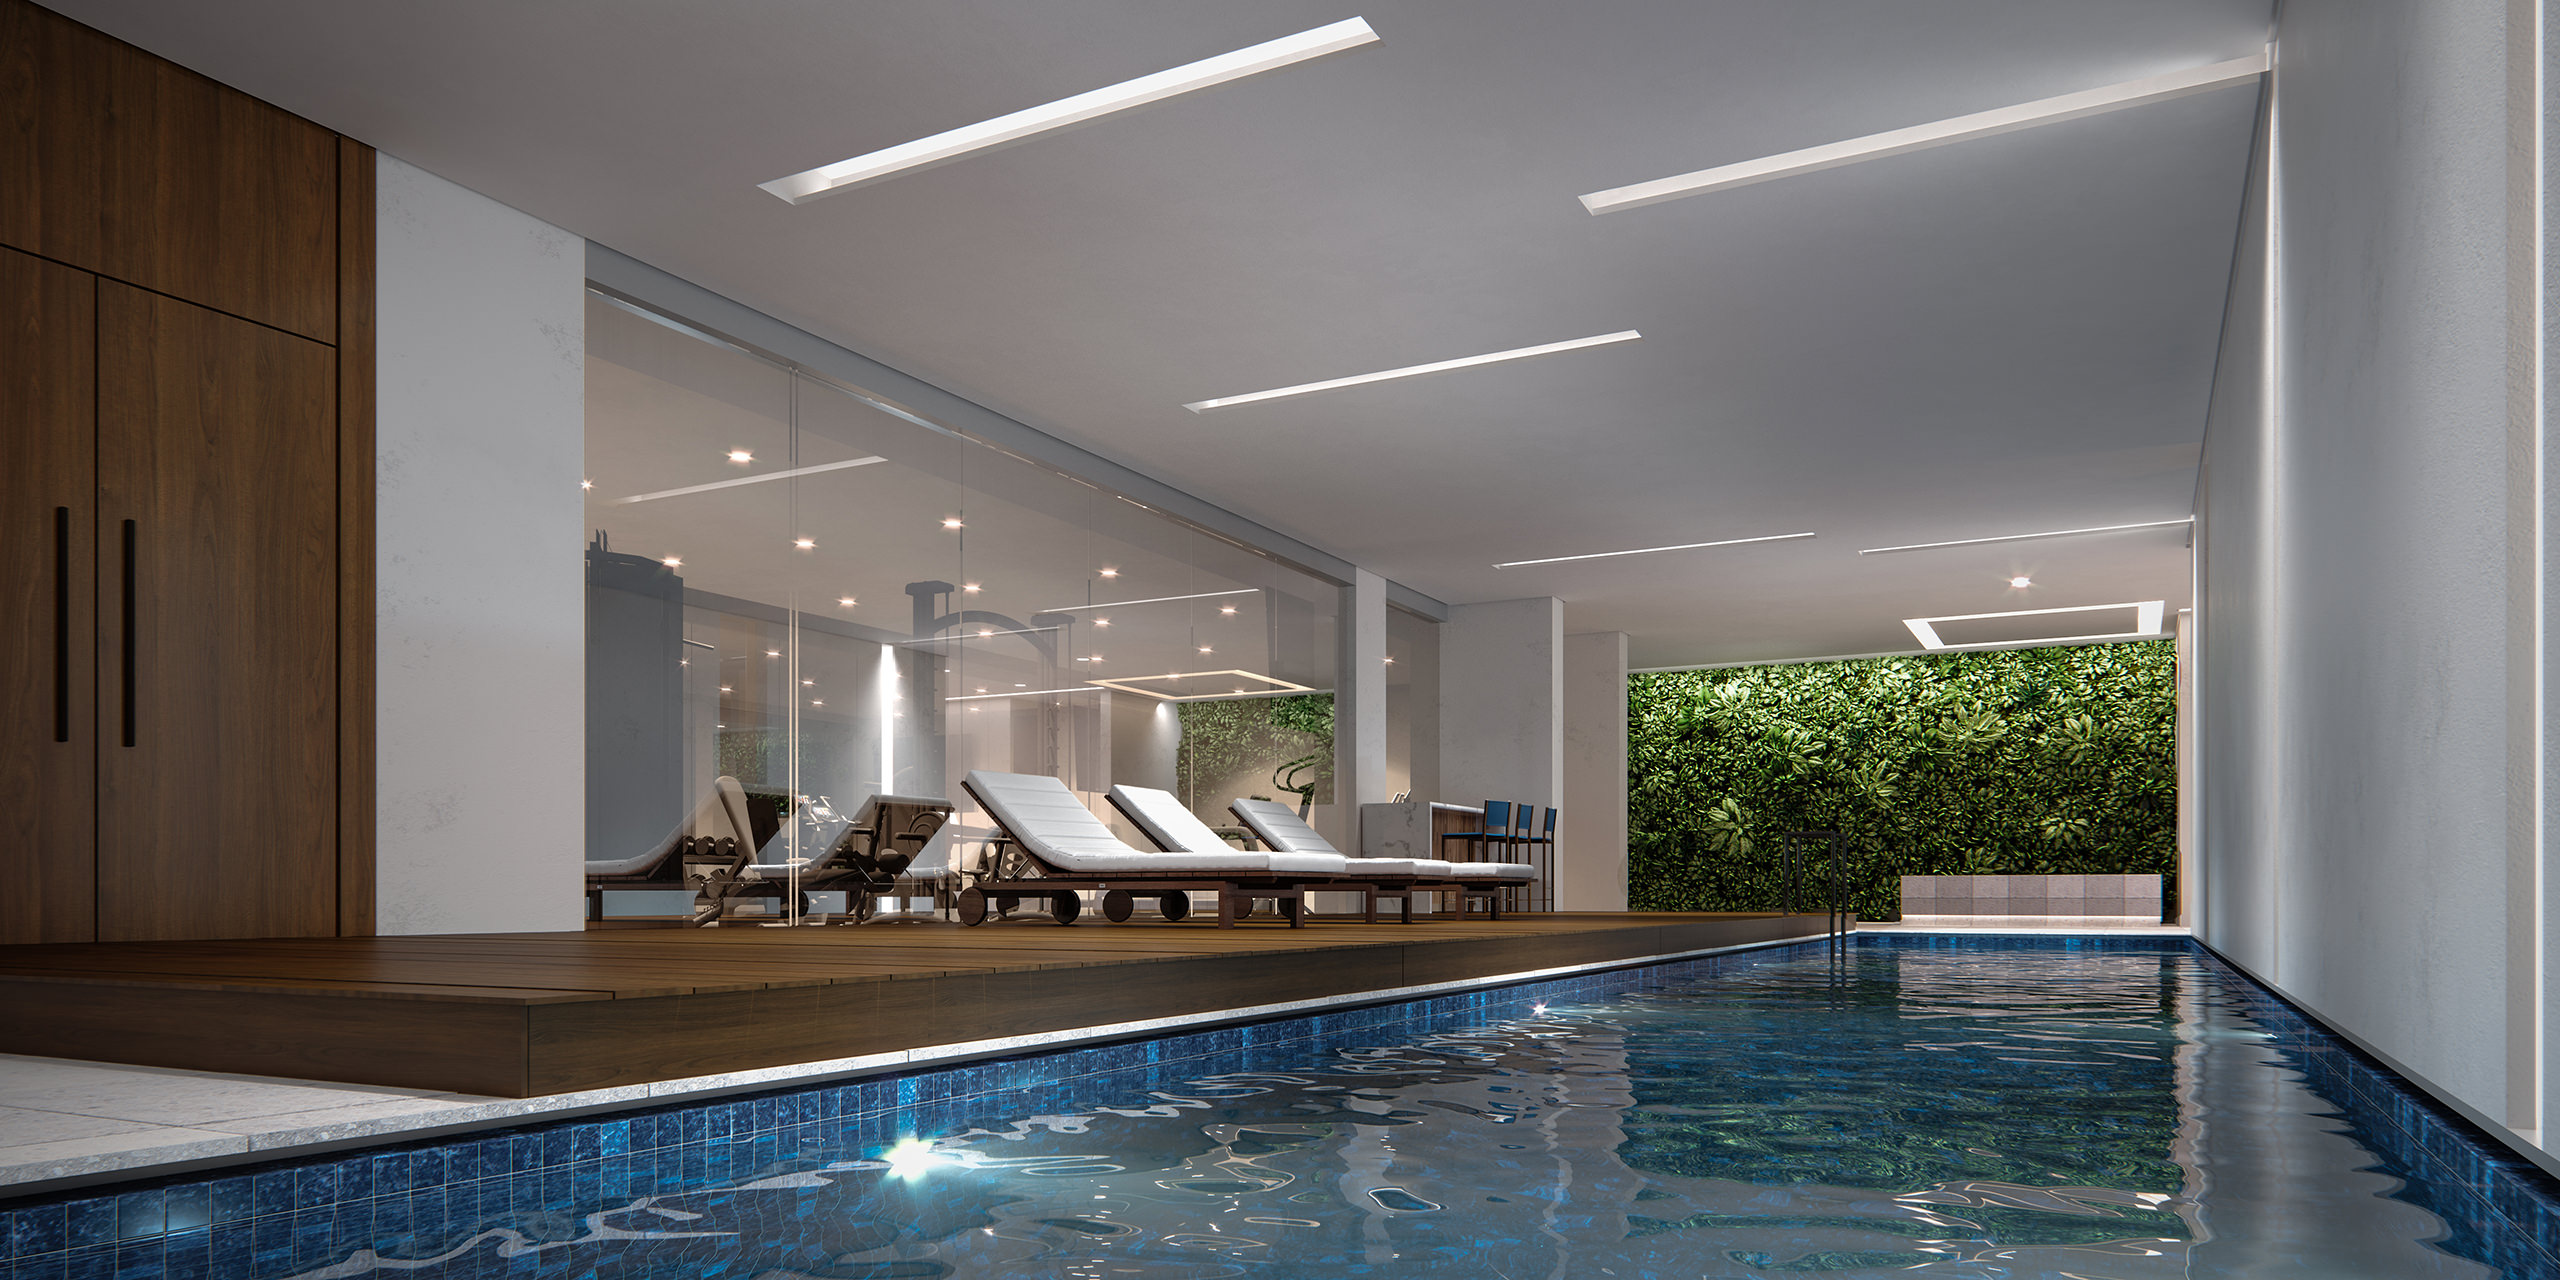 Interior pool 3D render with sunbeds and greenwall